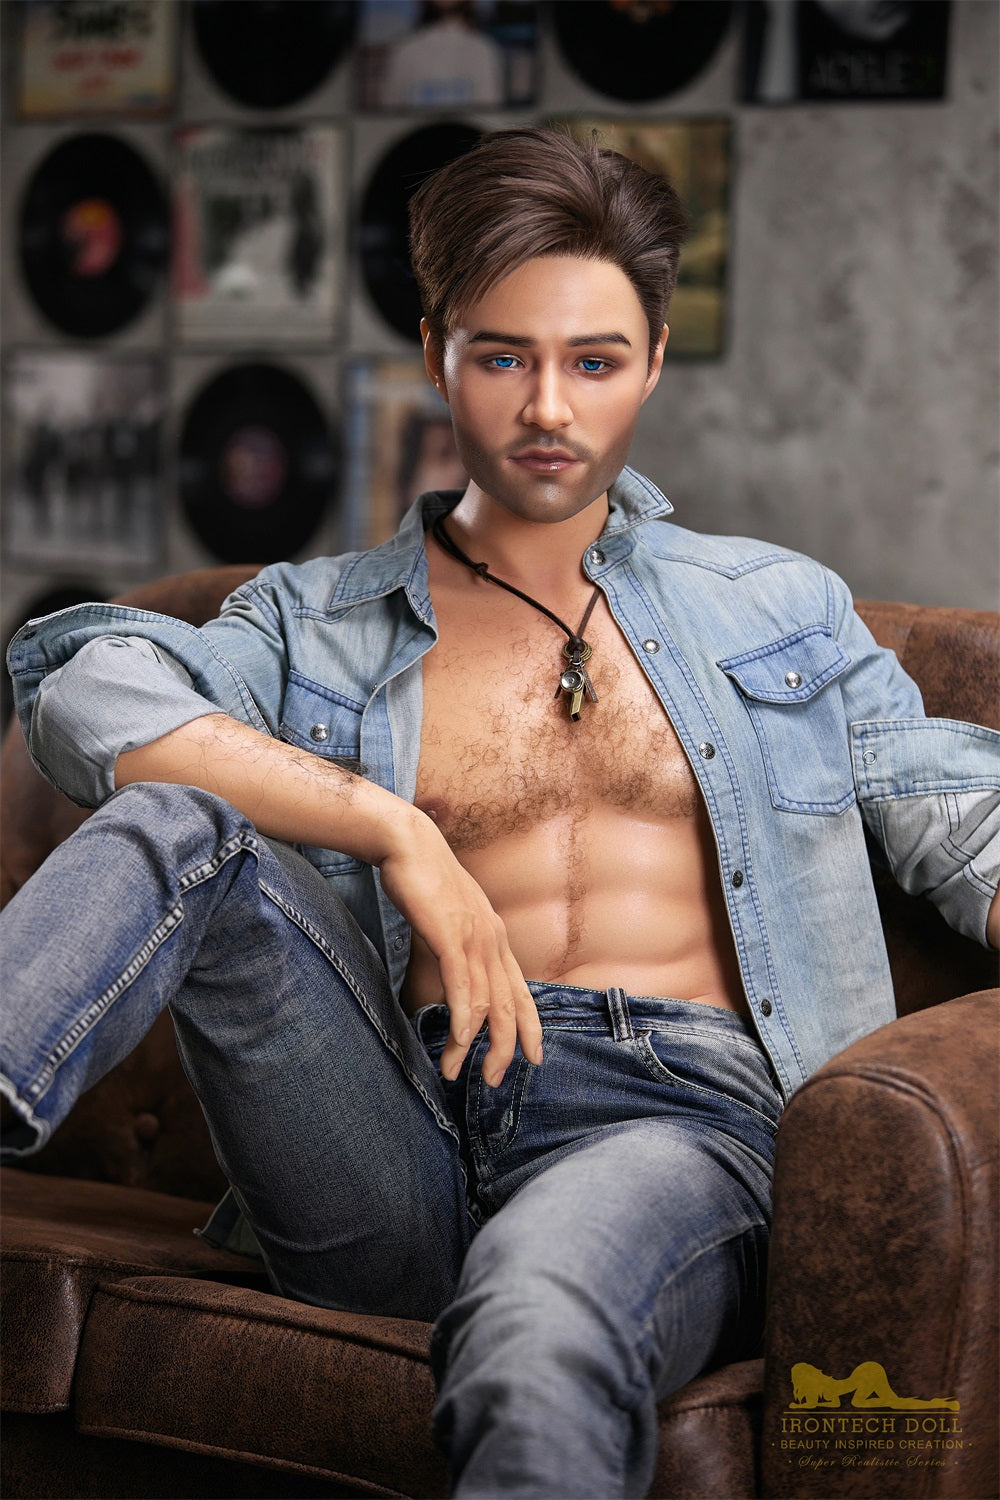 Irontechdoll 170cm M4 Jimmy Male Sex Doll Full Silicone Male Doll Gay Love Doll